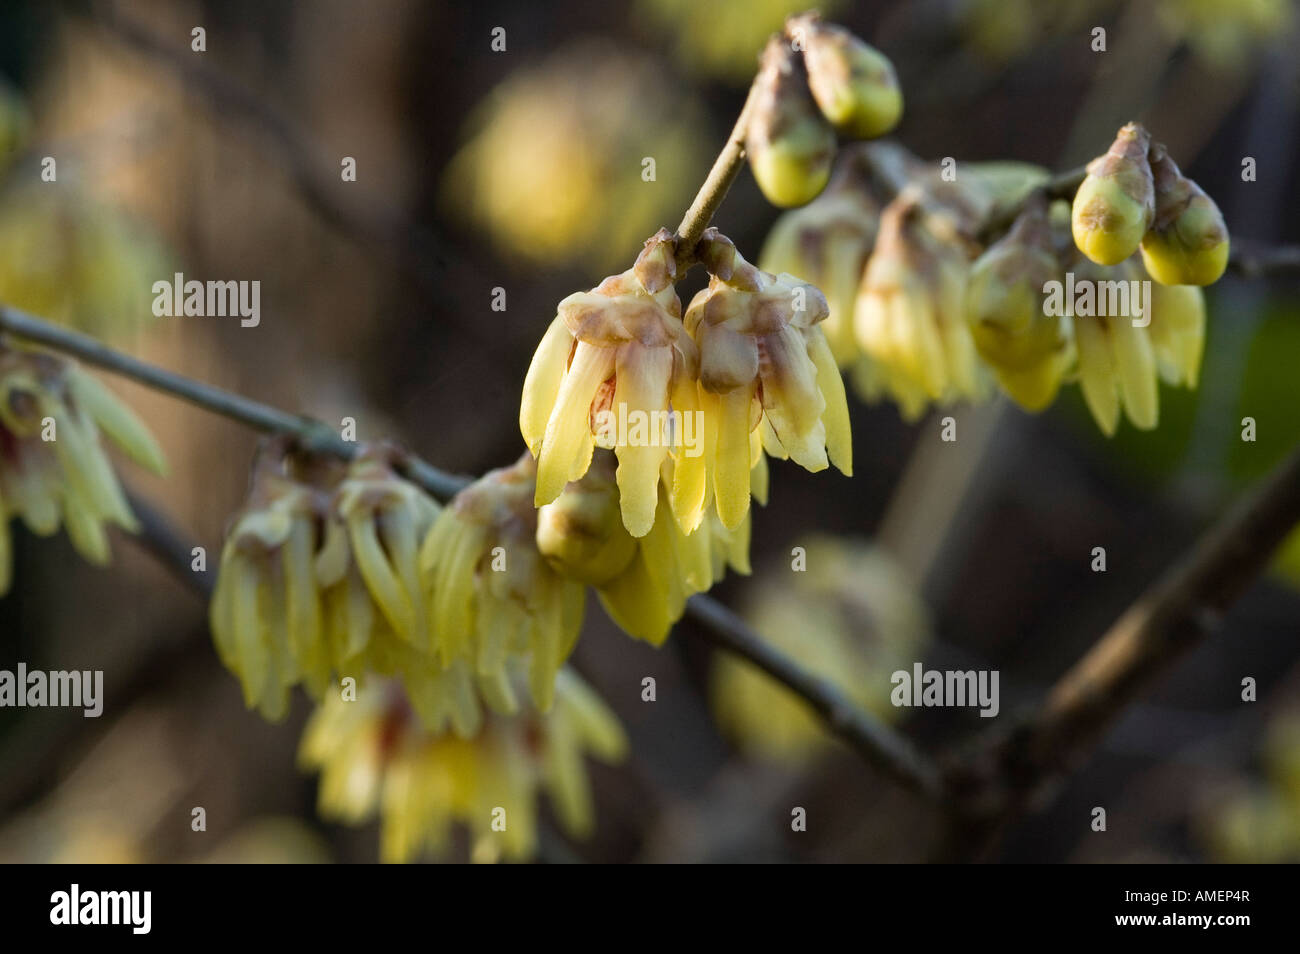 Winter flowering sweet scented flowering shrub Distinct spicy scent from flowers hence common name of Wintersweet Stock Photo